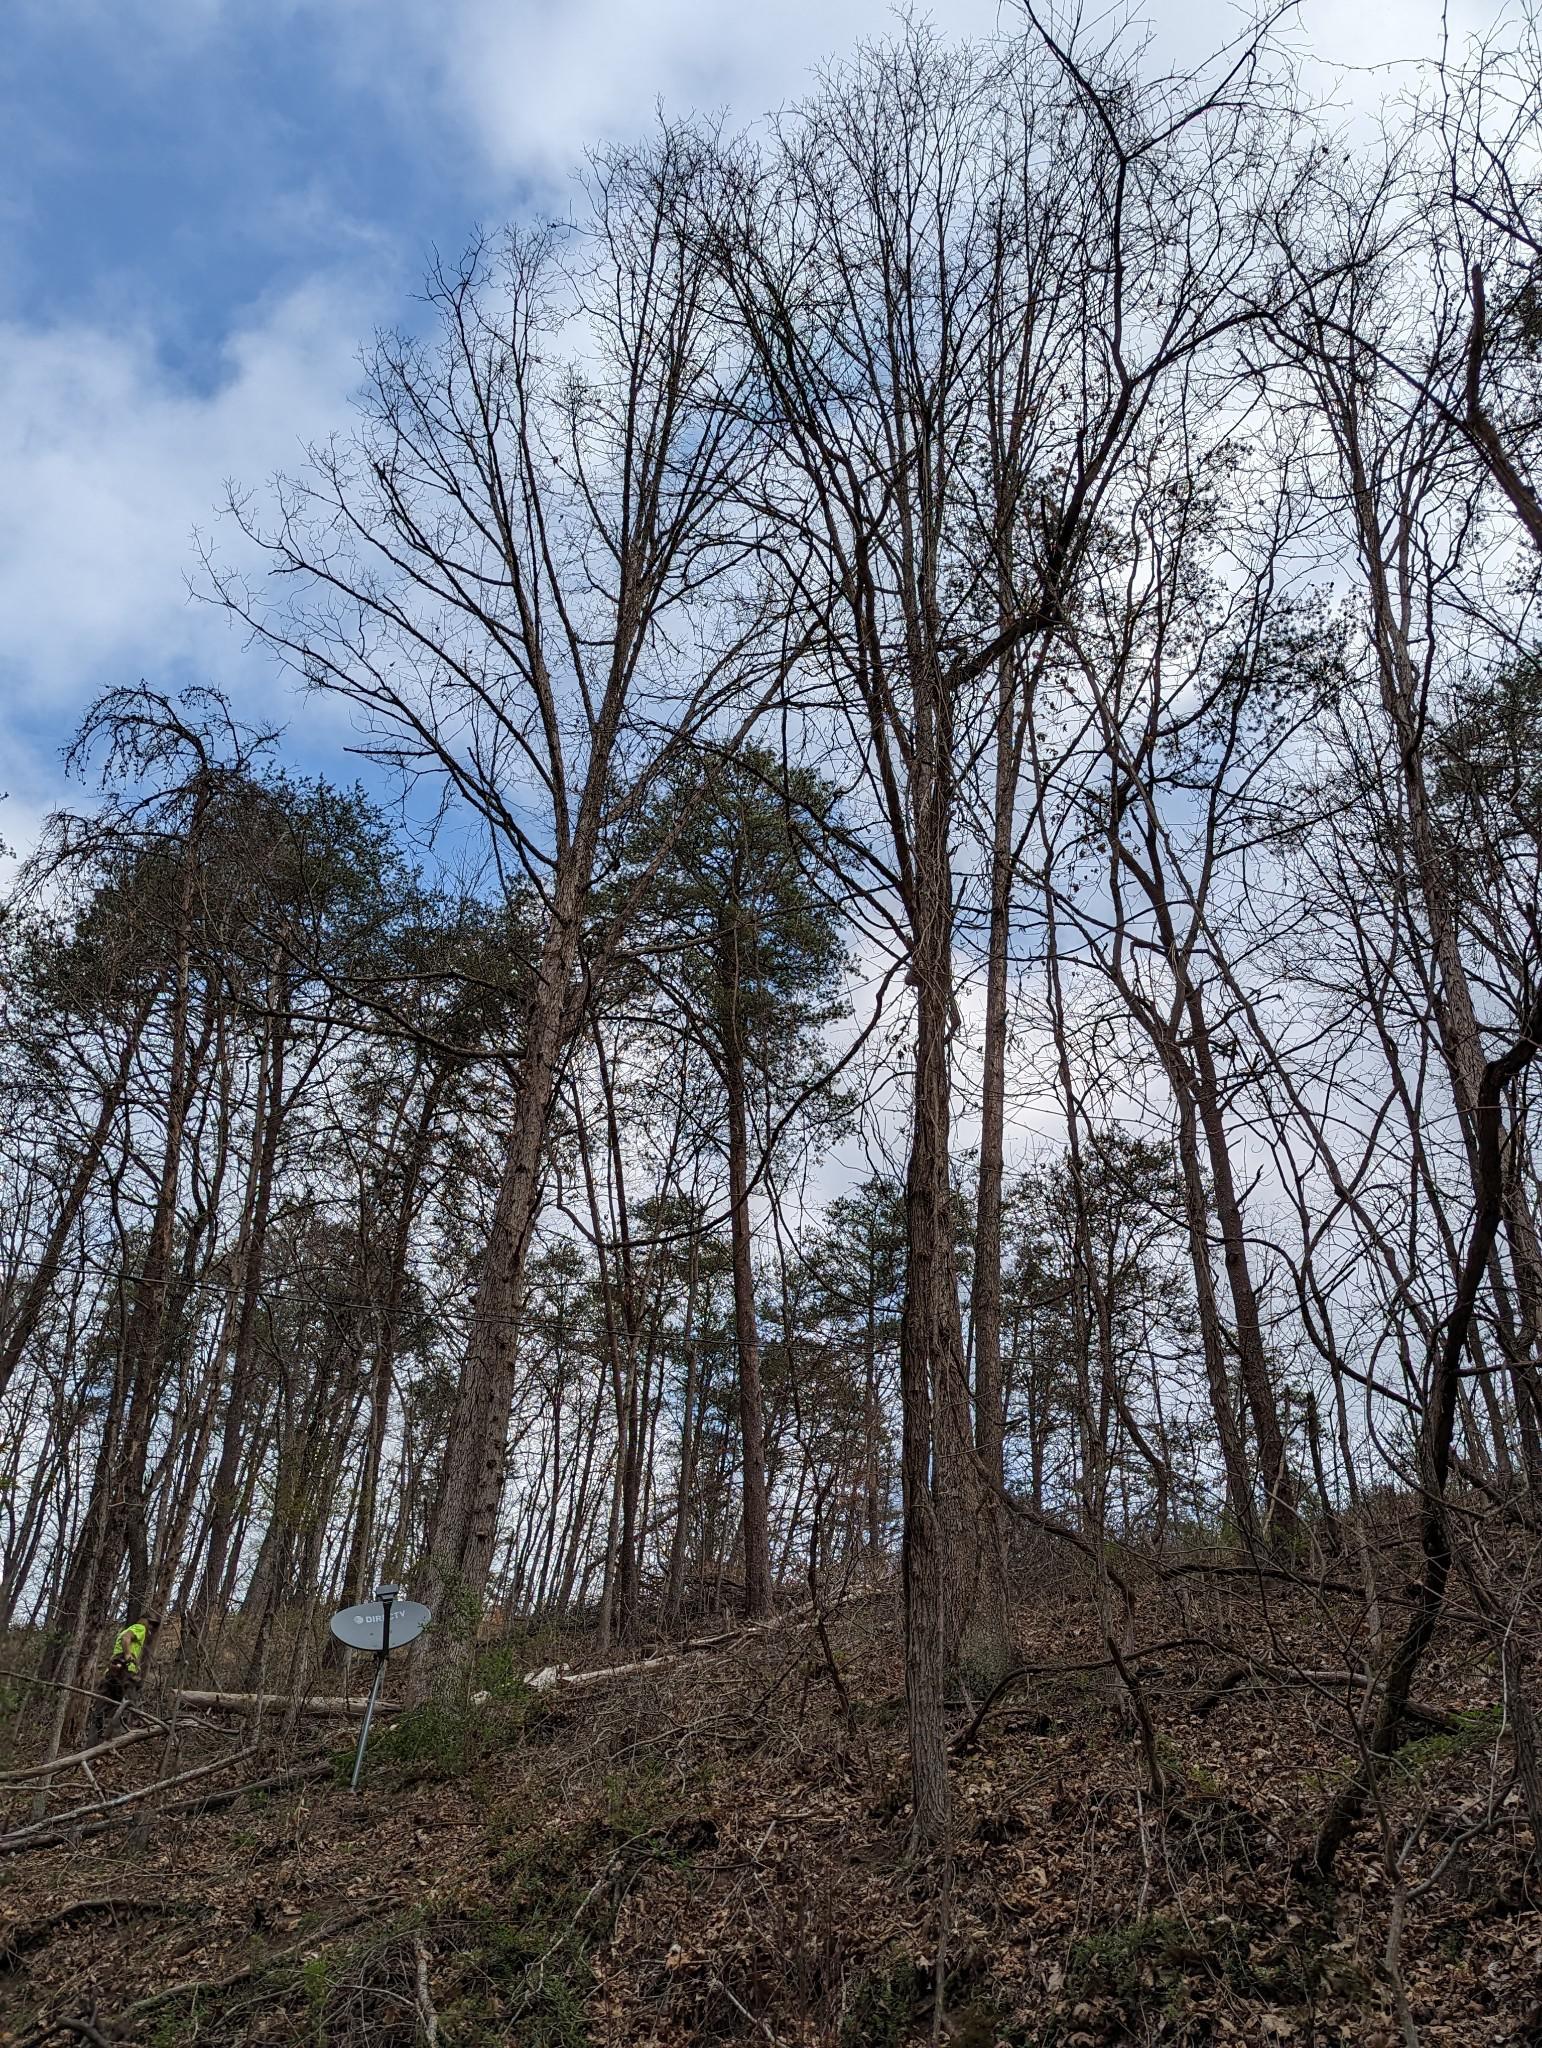 For businesses in Princeton, WV, Wyrick Tree Service offers professional commercial tree services. We understand the importance of a well-maintained landscape for your commercial property, and we deliver expert care to enhance its appeal and safety.